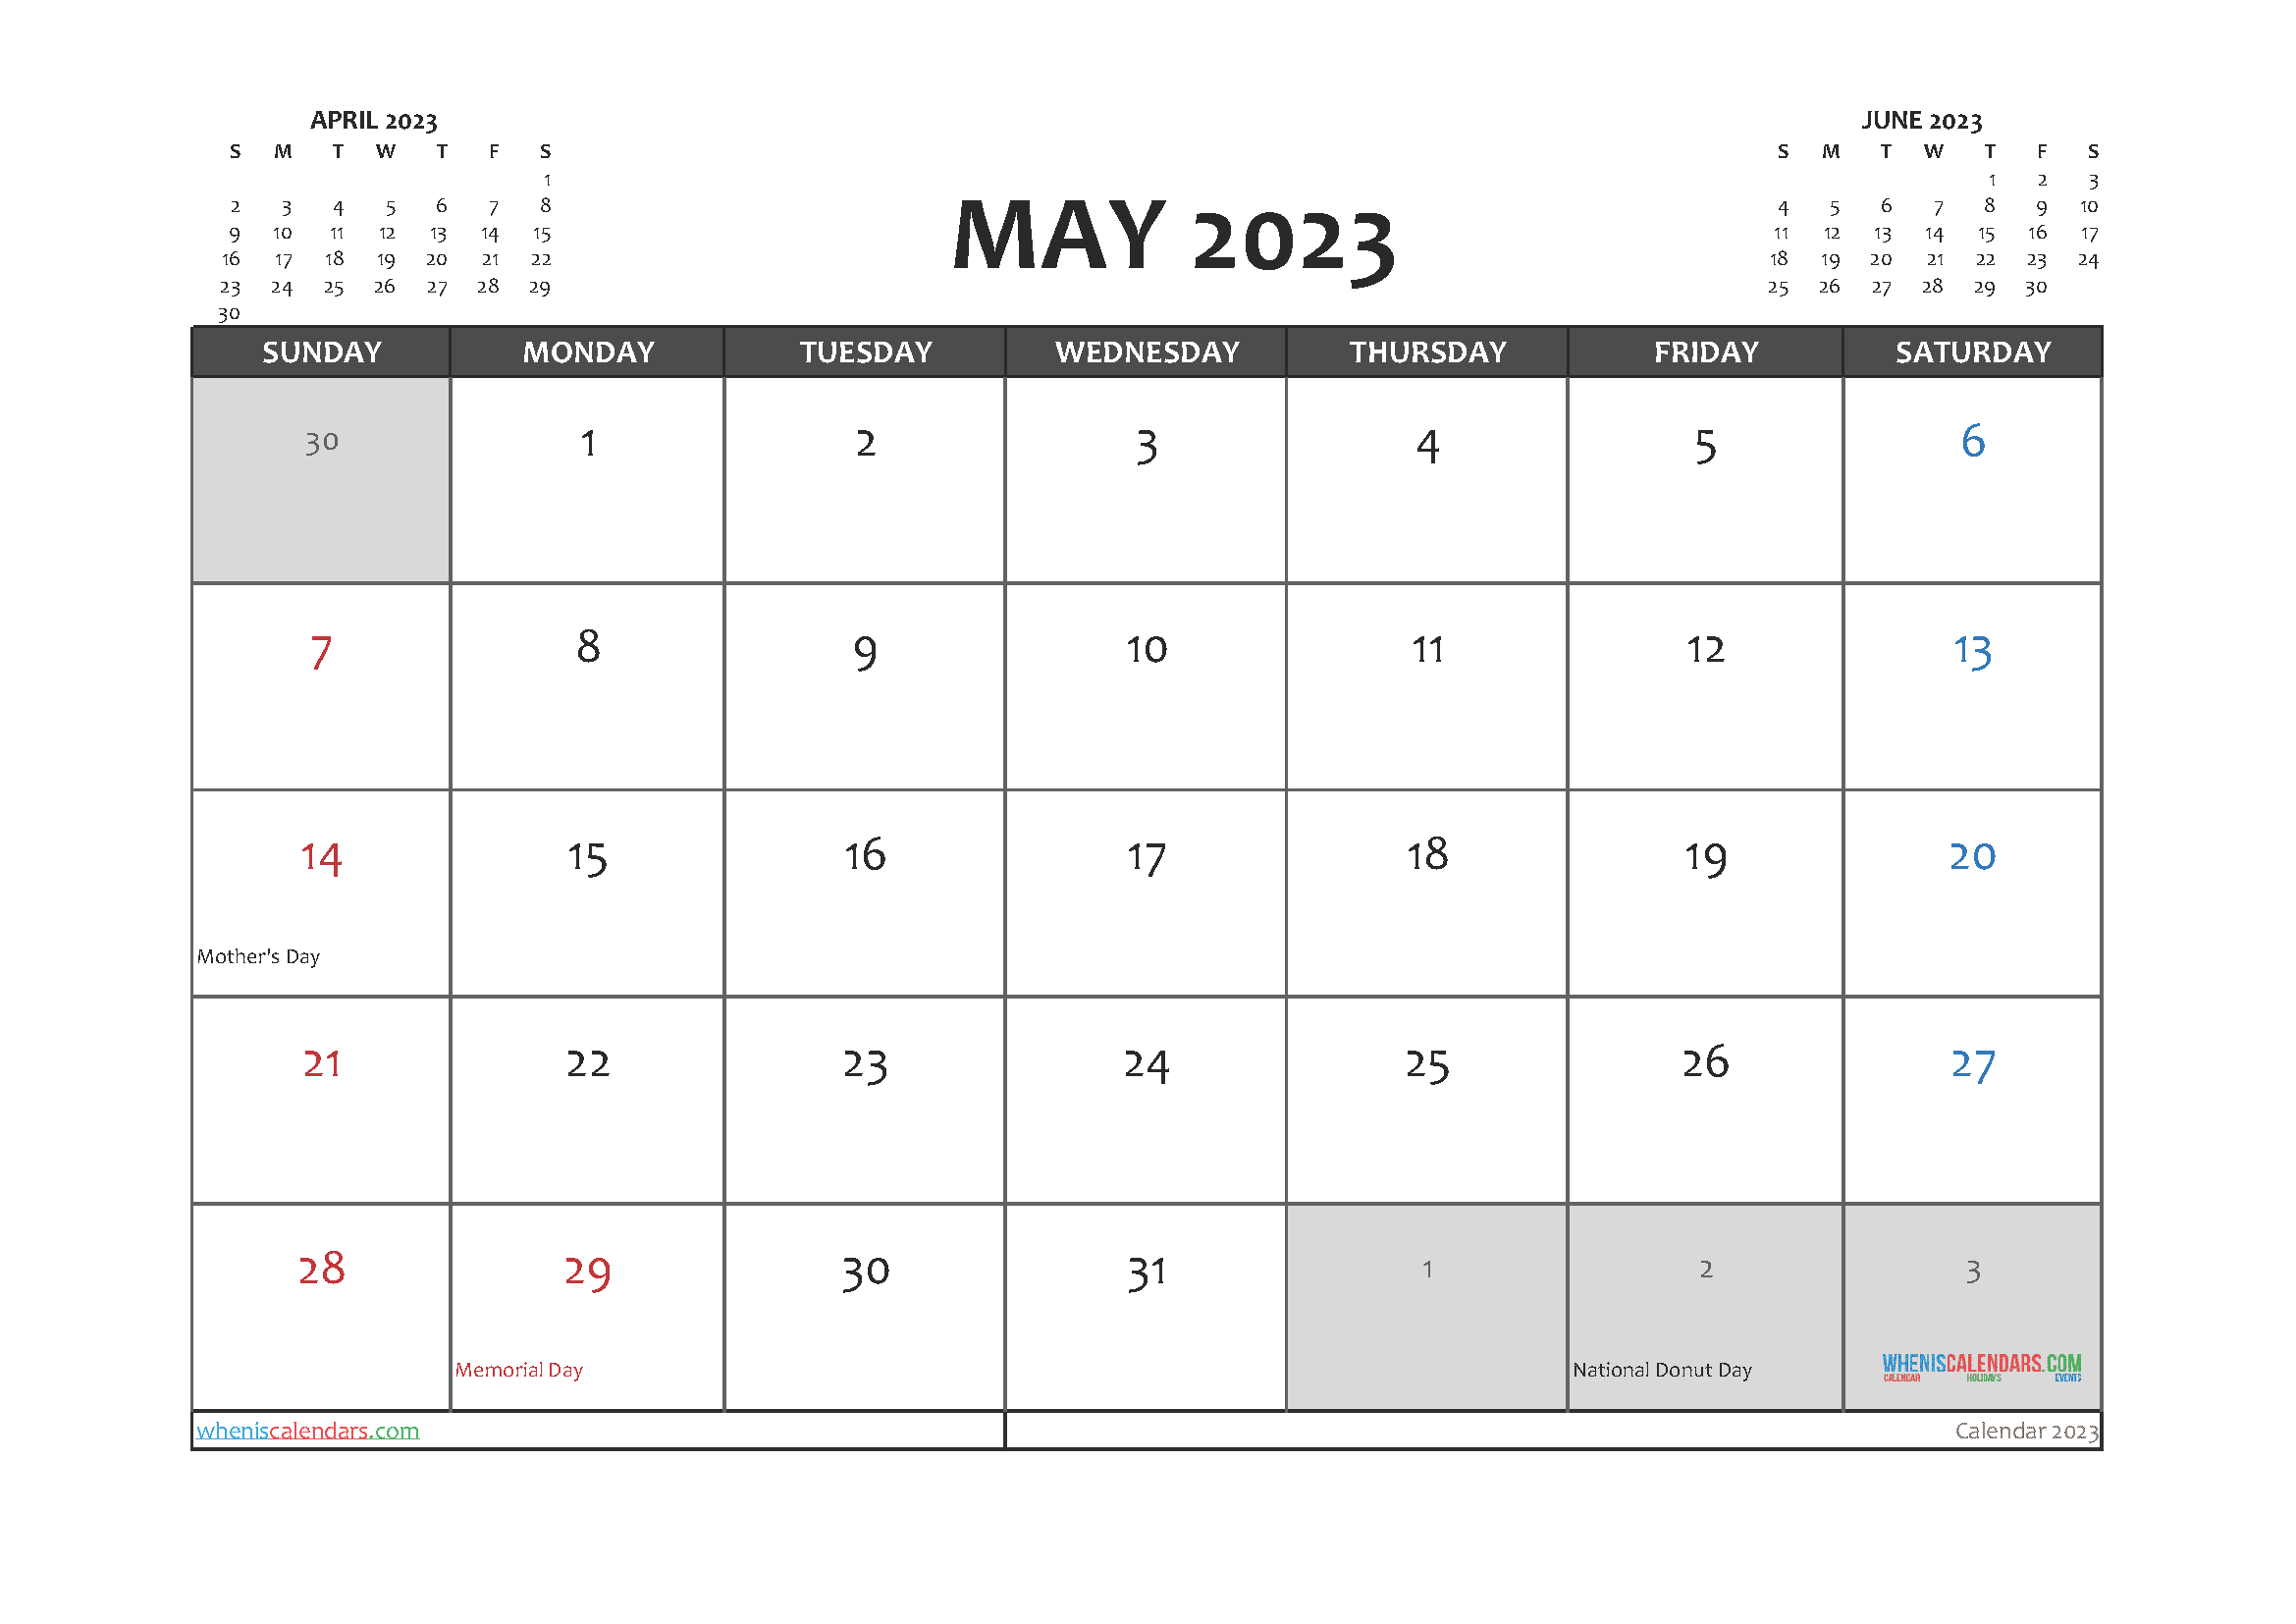 May 2023 Calendar with Holidays Free Printable PDF in Landscape